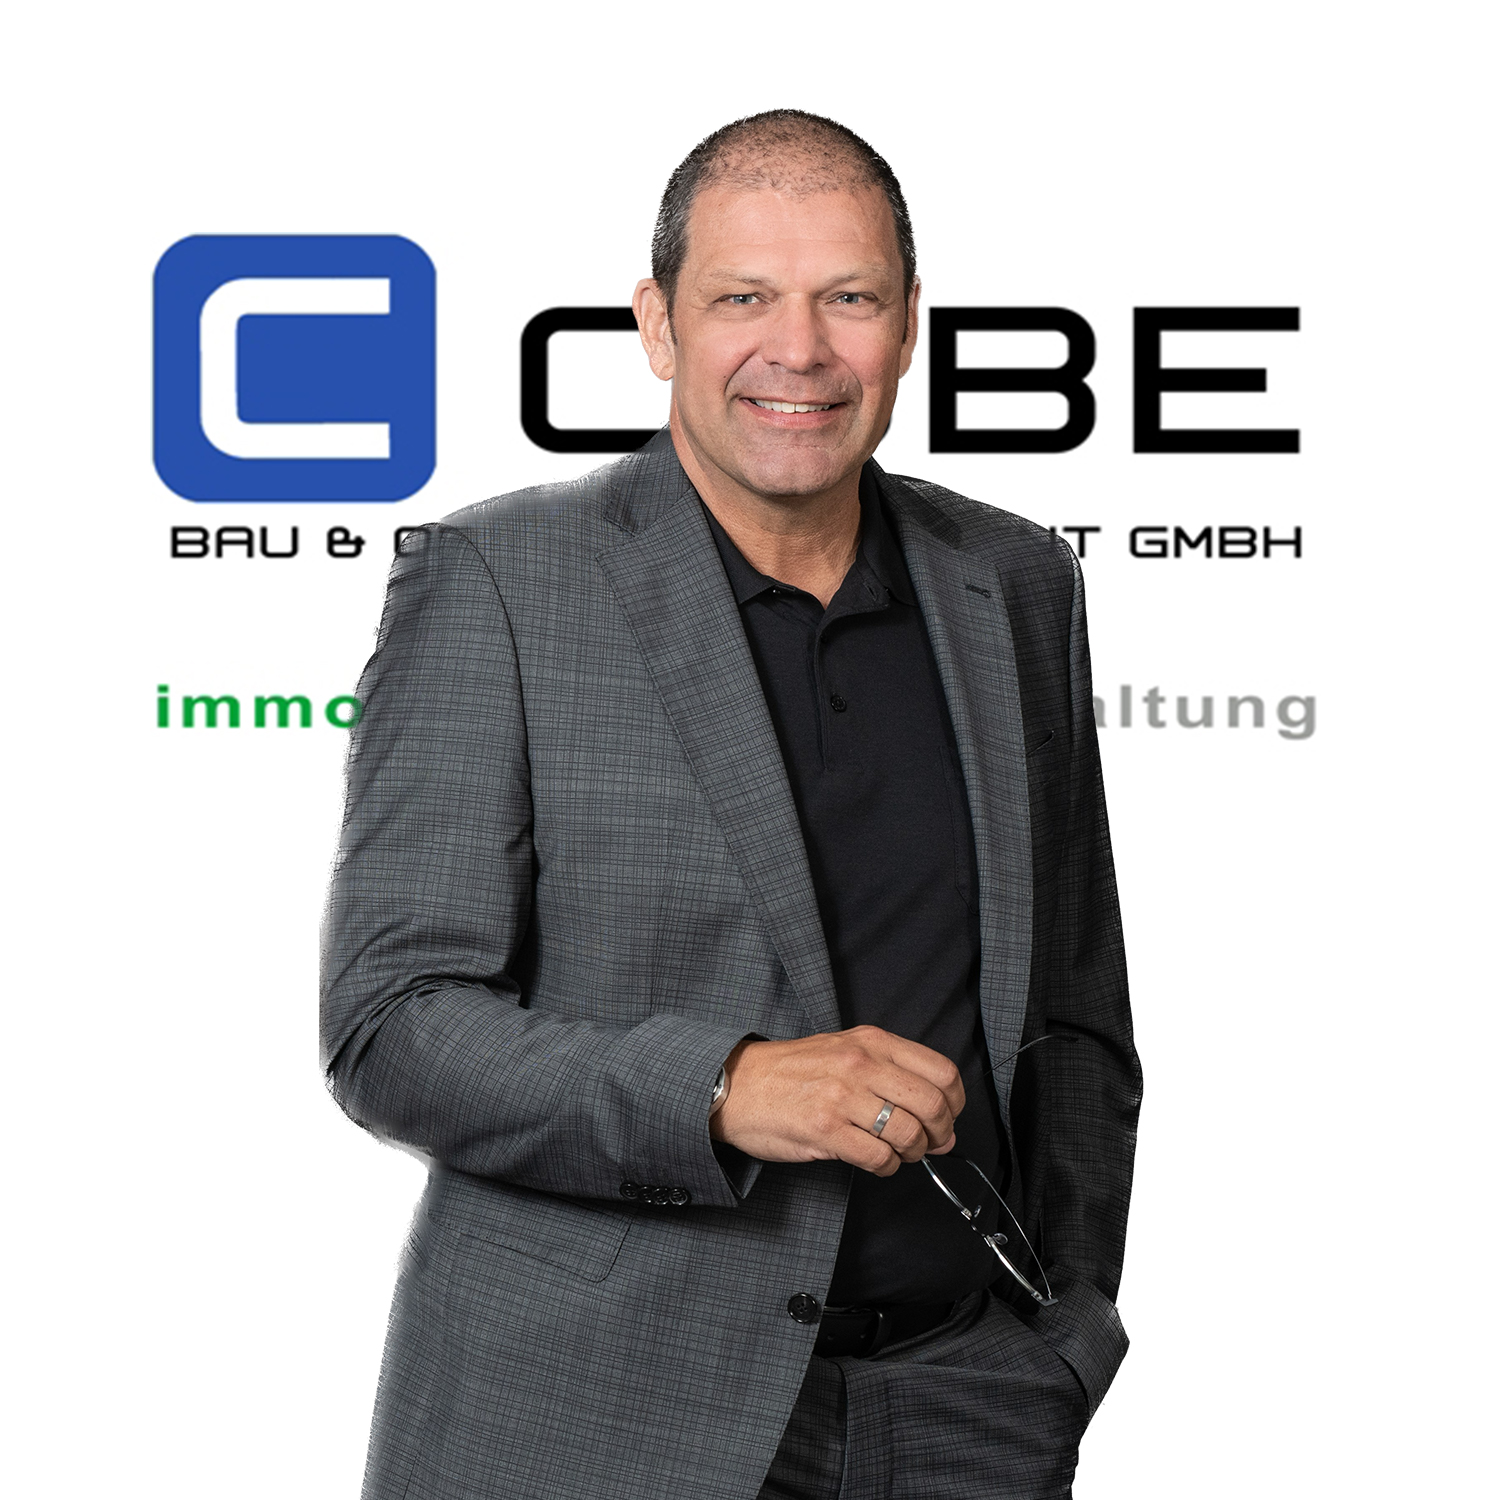 (c) Cube-immobilien.at